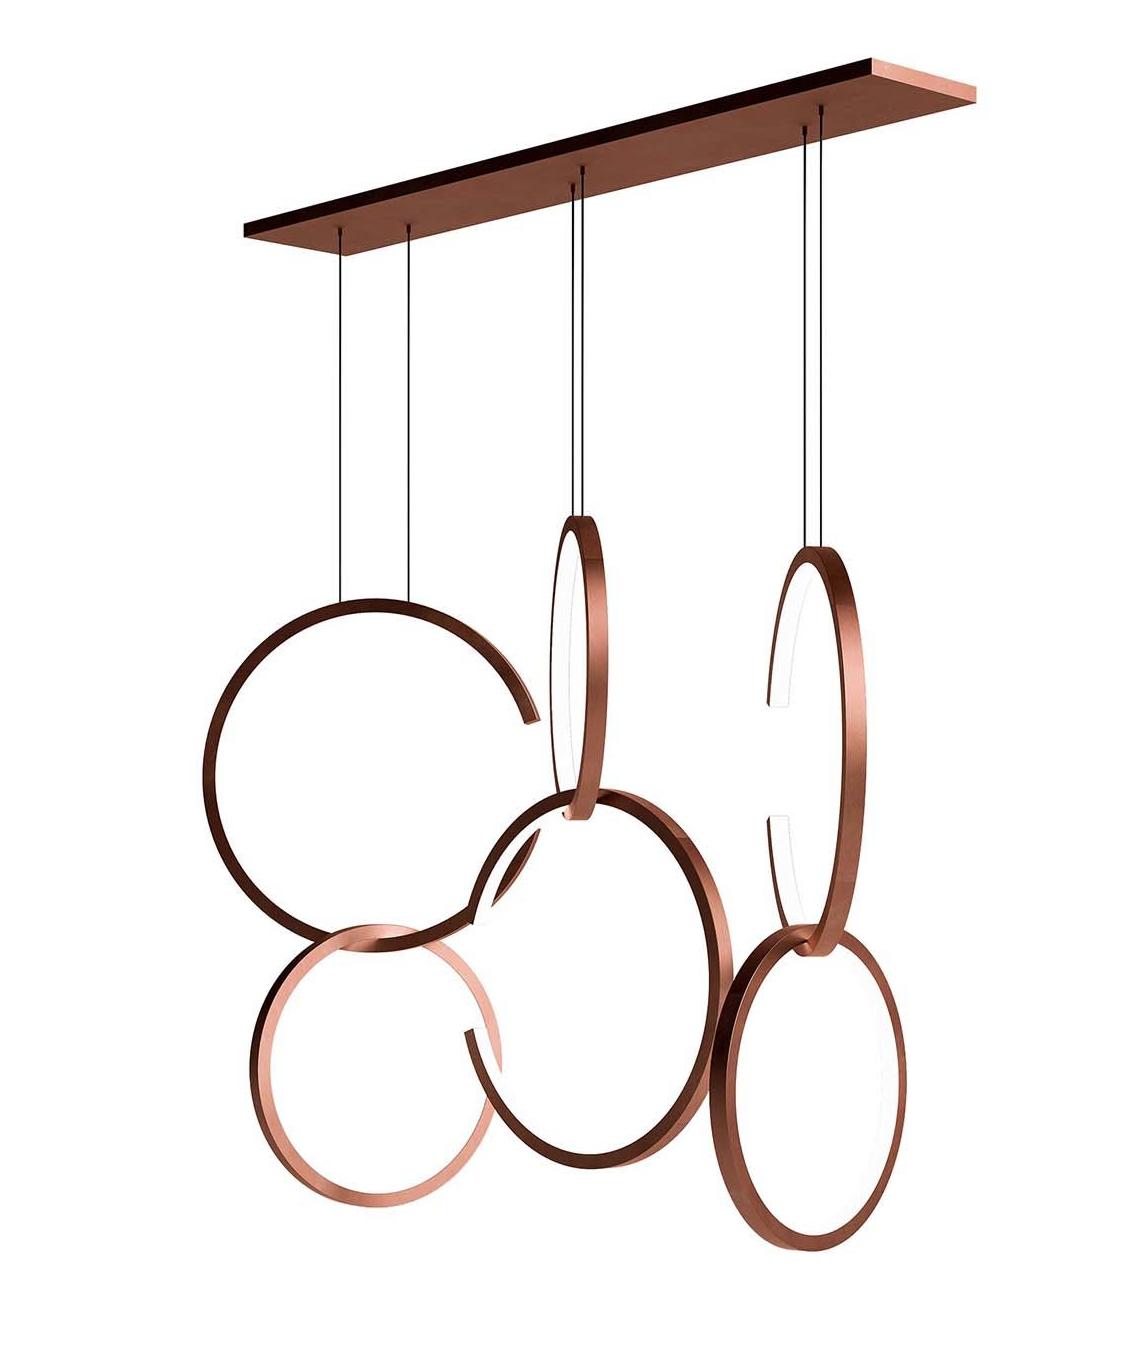 Rings Pendant Light from Italy